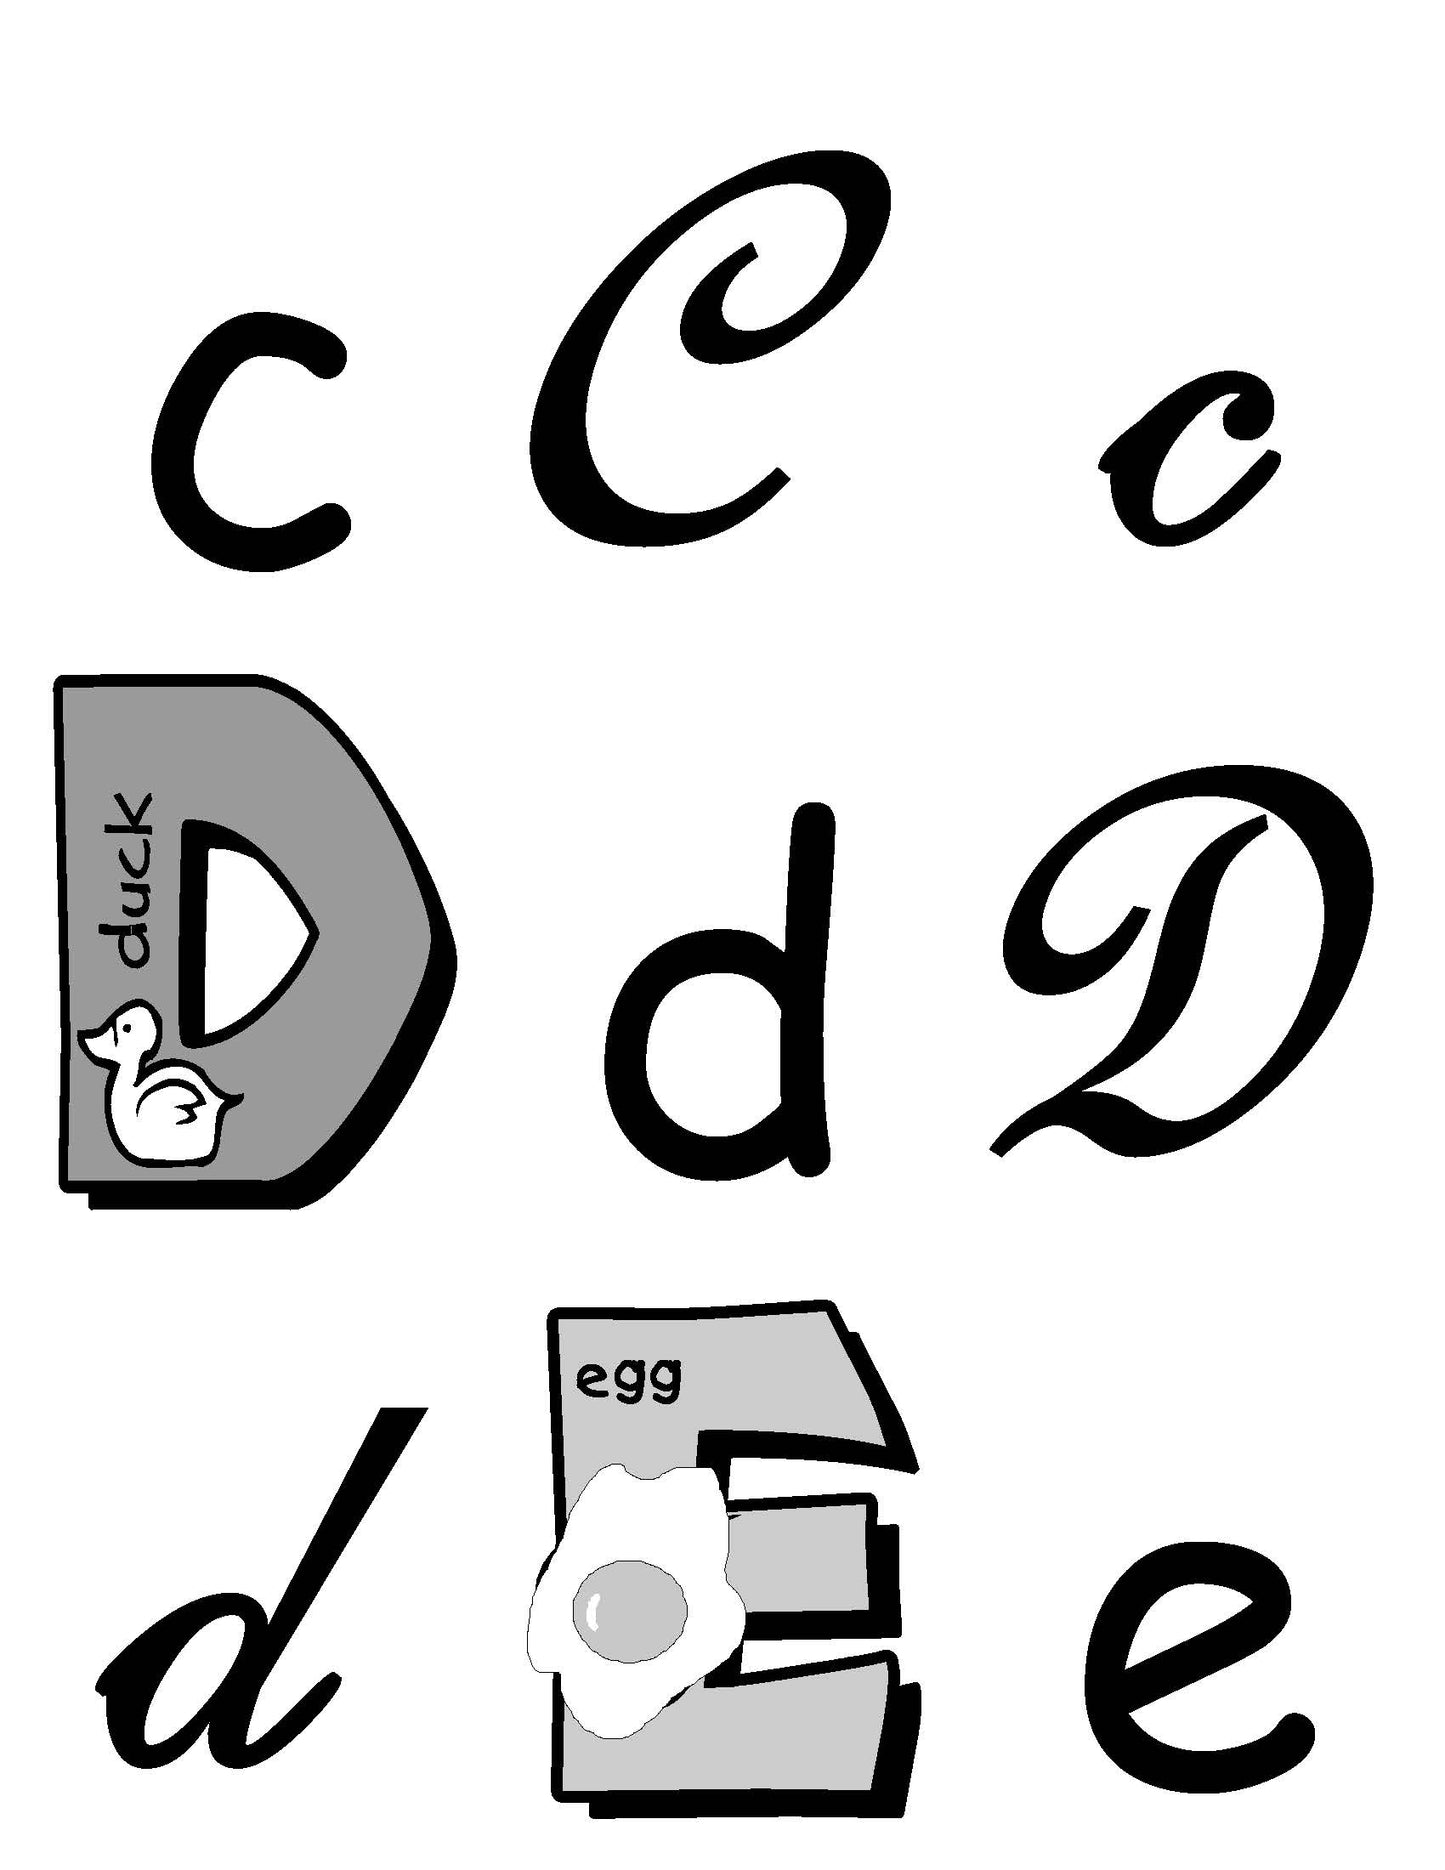 A-07.5: Use Alphabet-Letter Cards AaAa to ZzZz, Version 3, in Learning Activities & Games